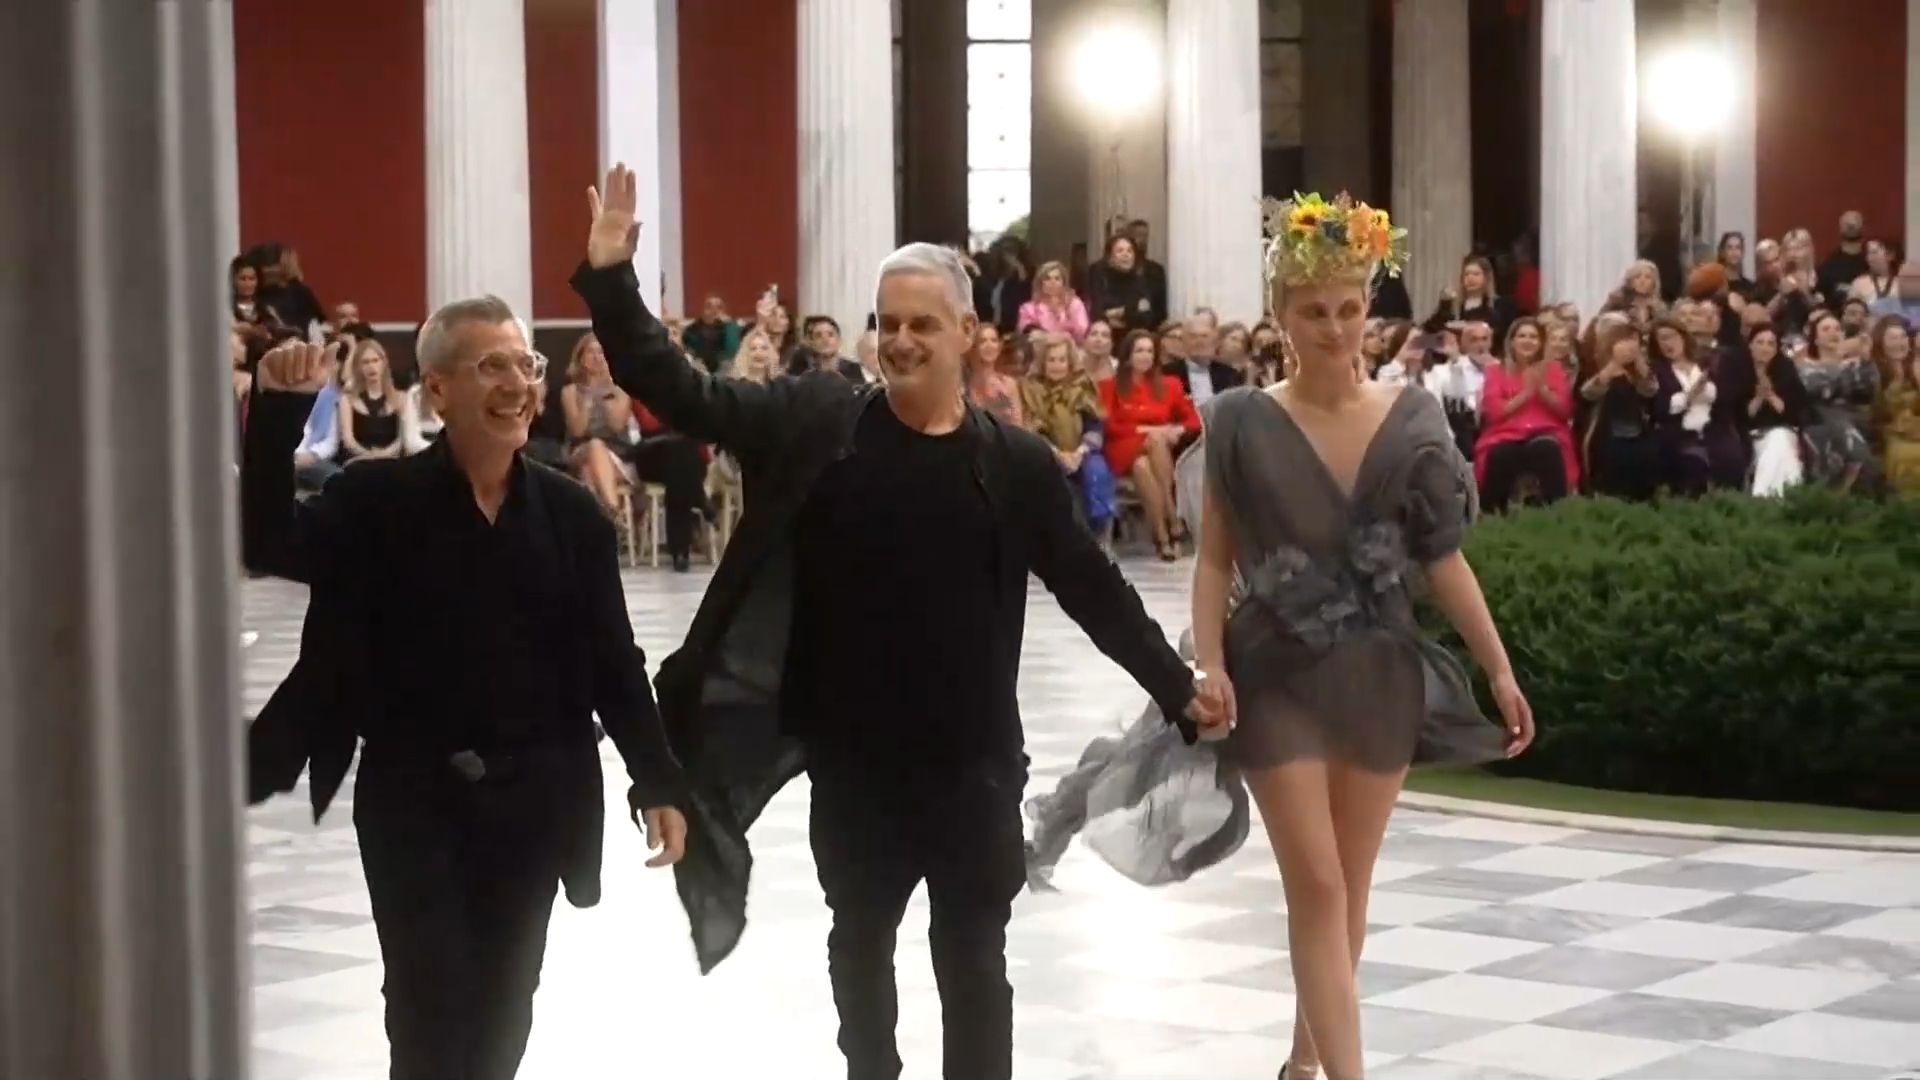 The best moments from Dassio's show